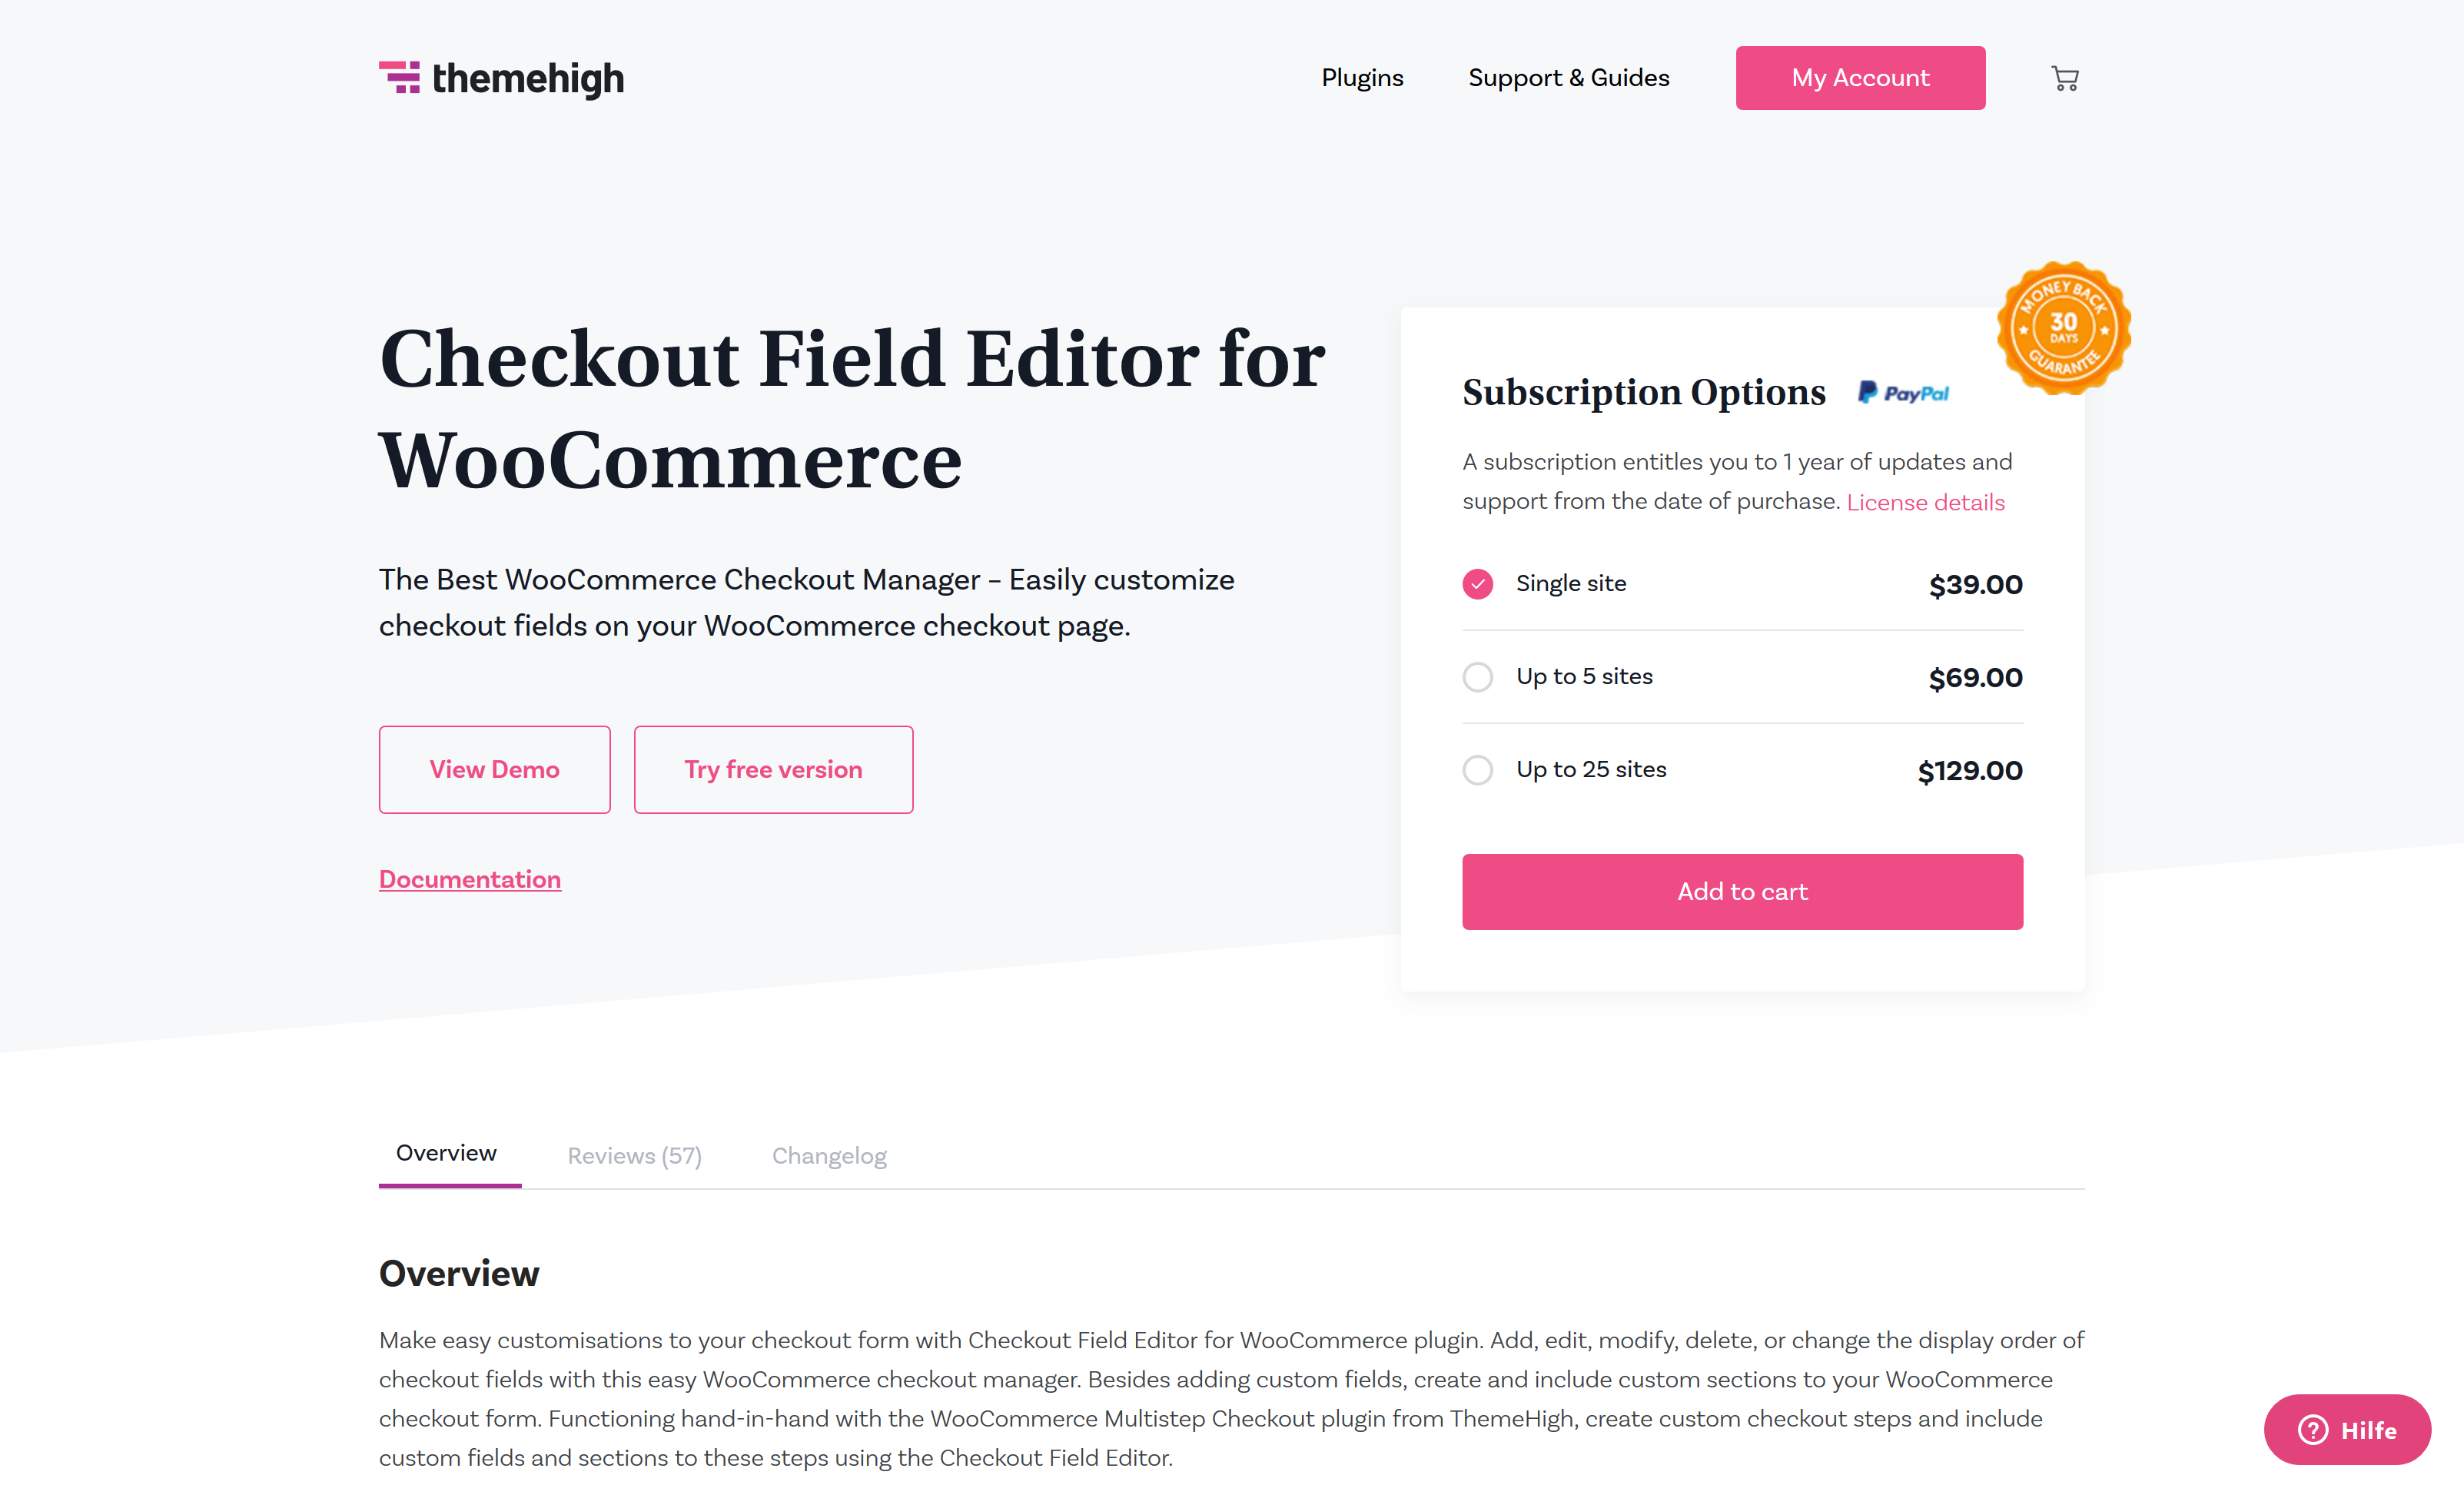 Checkout Field Editor for WooCommerce 3.2.0 by Themehigh